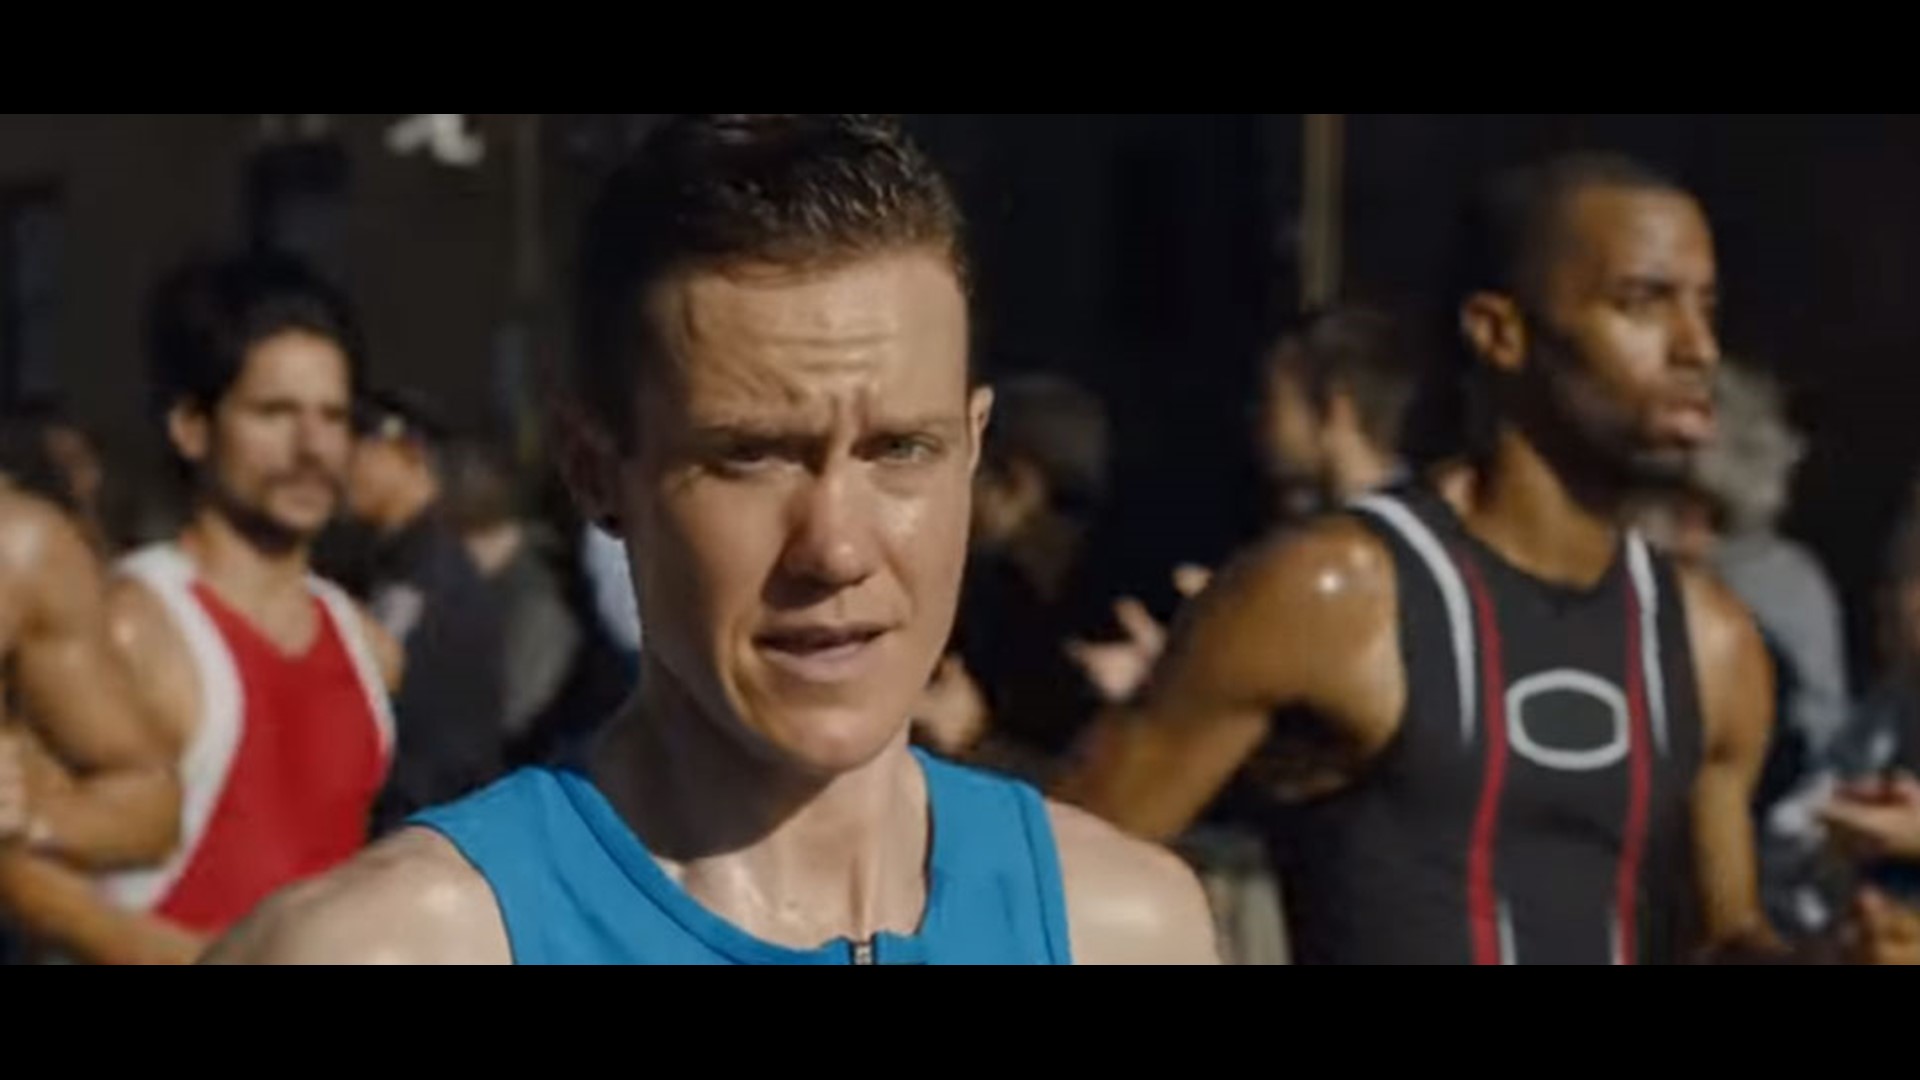 WATCH First Nike ad featuring transgender athlete airs during Olympics